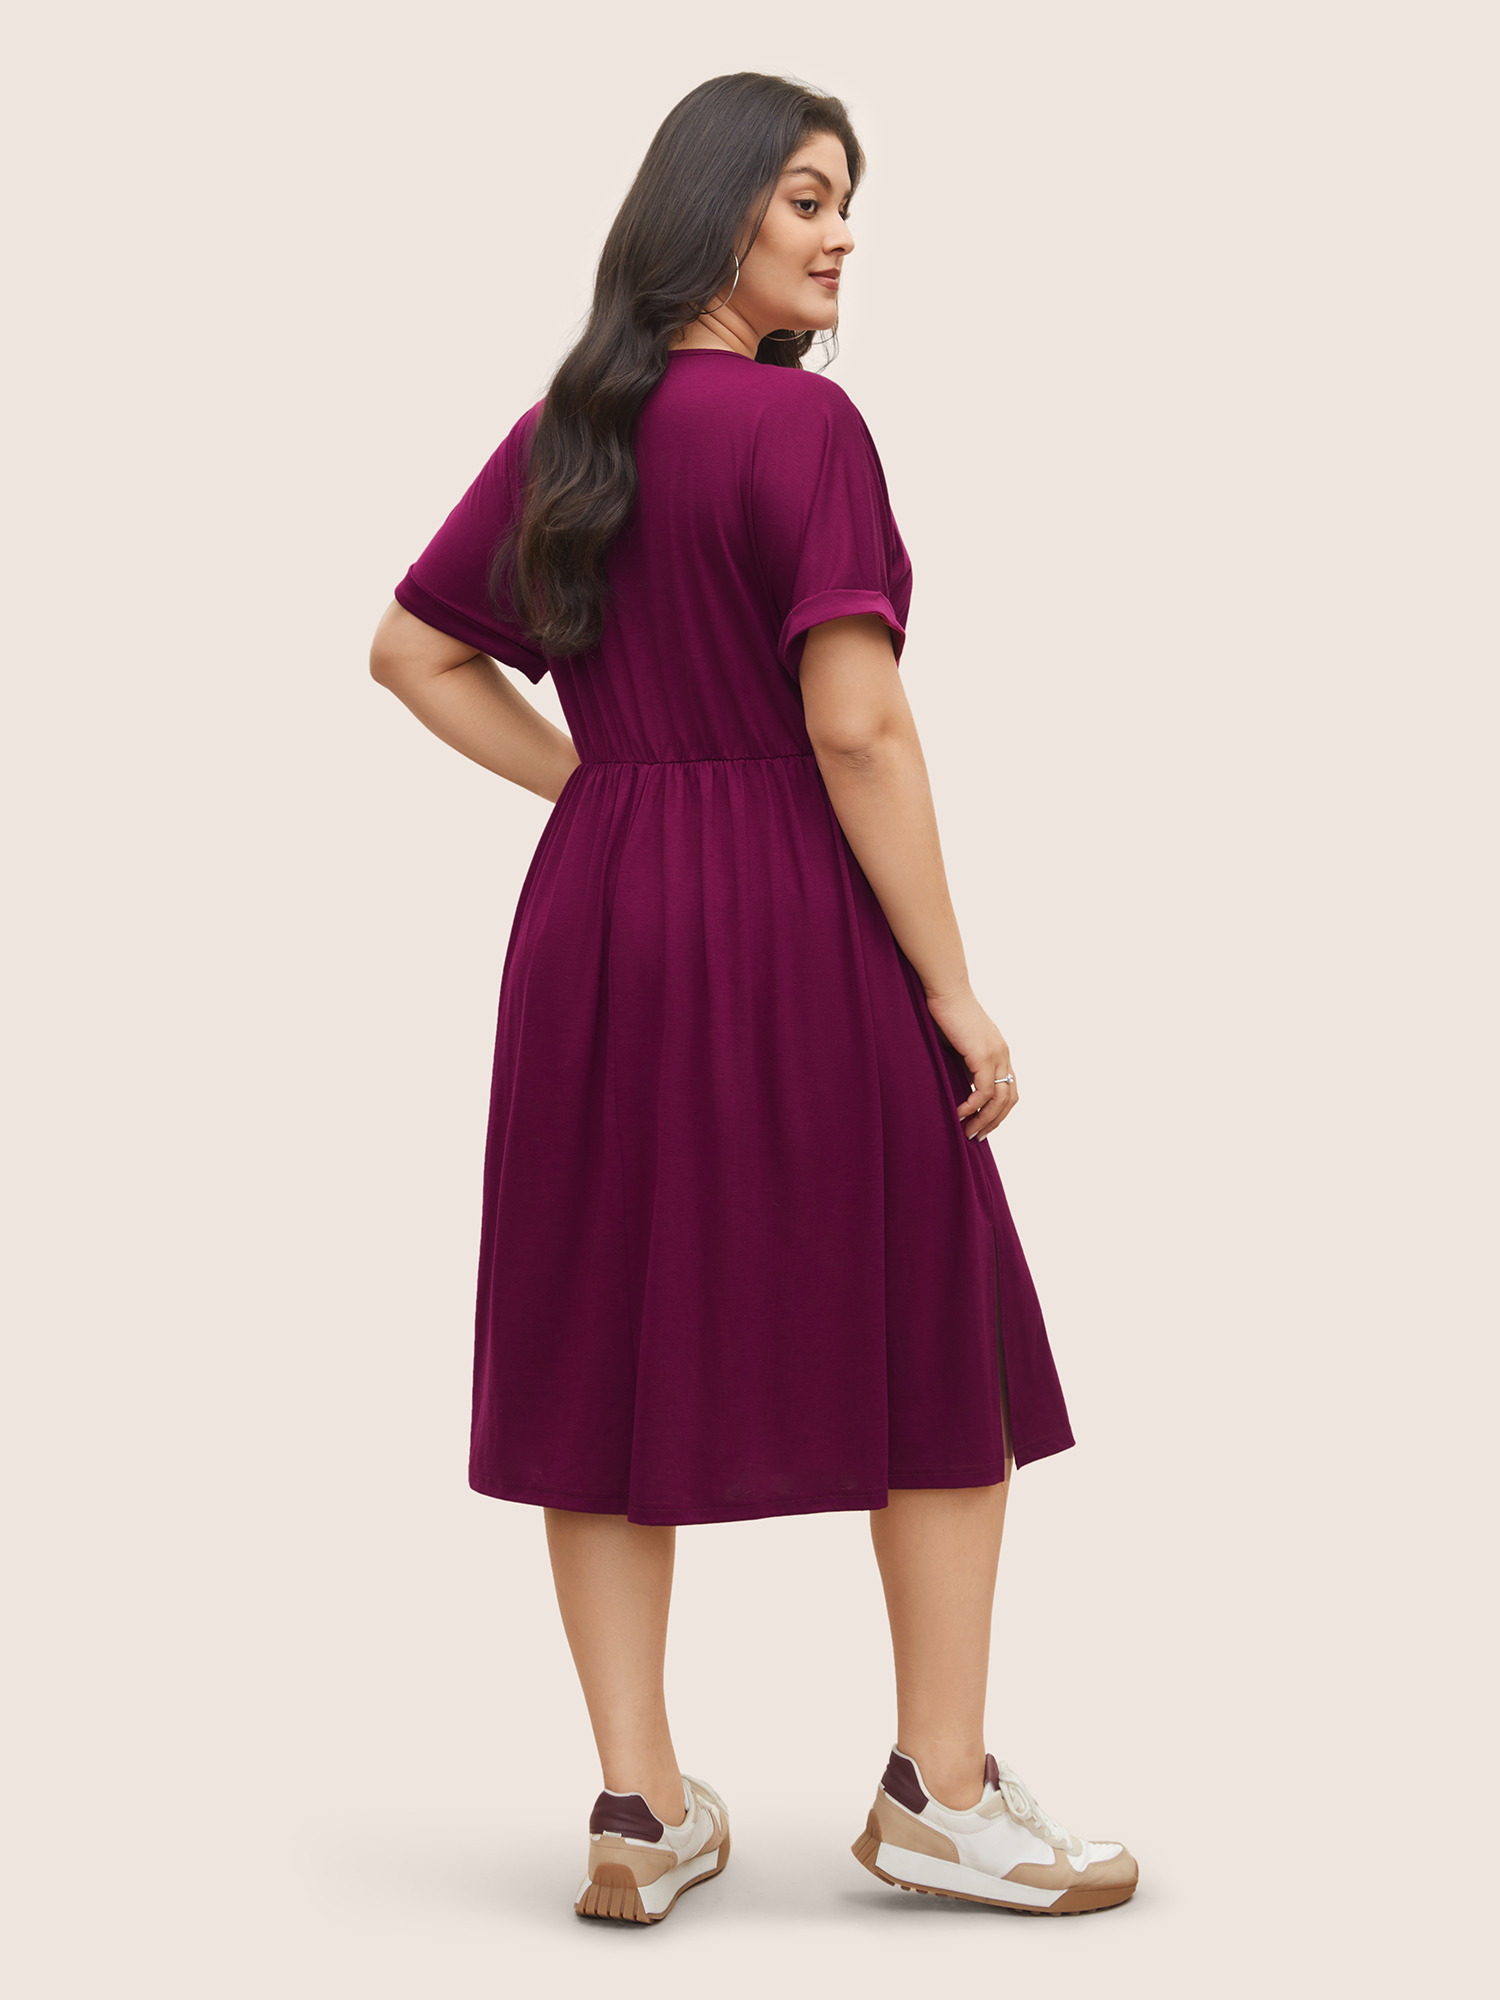 

Plus Size Supersoft Essentials Solid Pocket Cuffed Sleeve Dress RedViolet Women Non Round Neck Short sleeve Curvy Midi Dress BloomChic